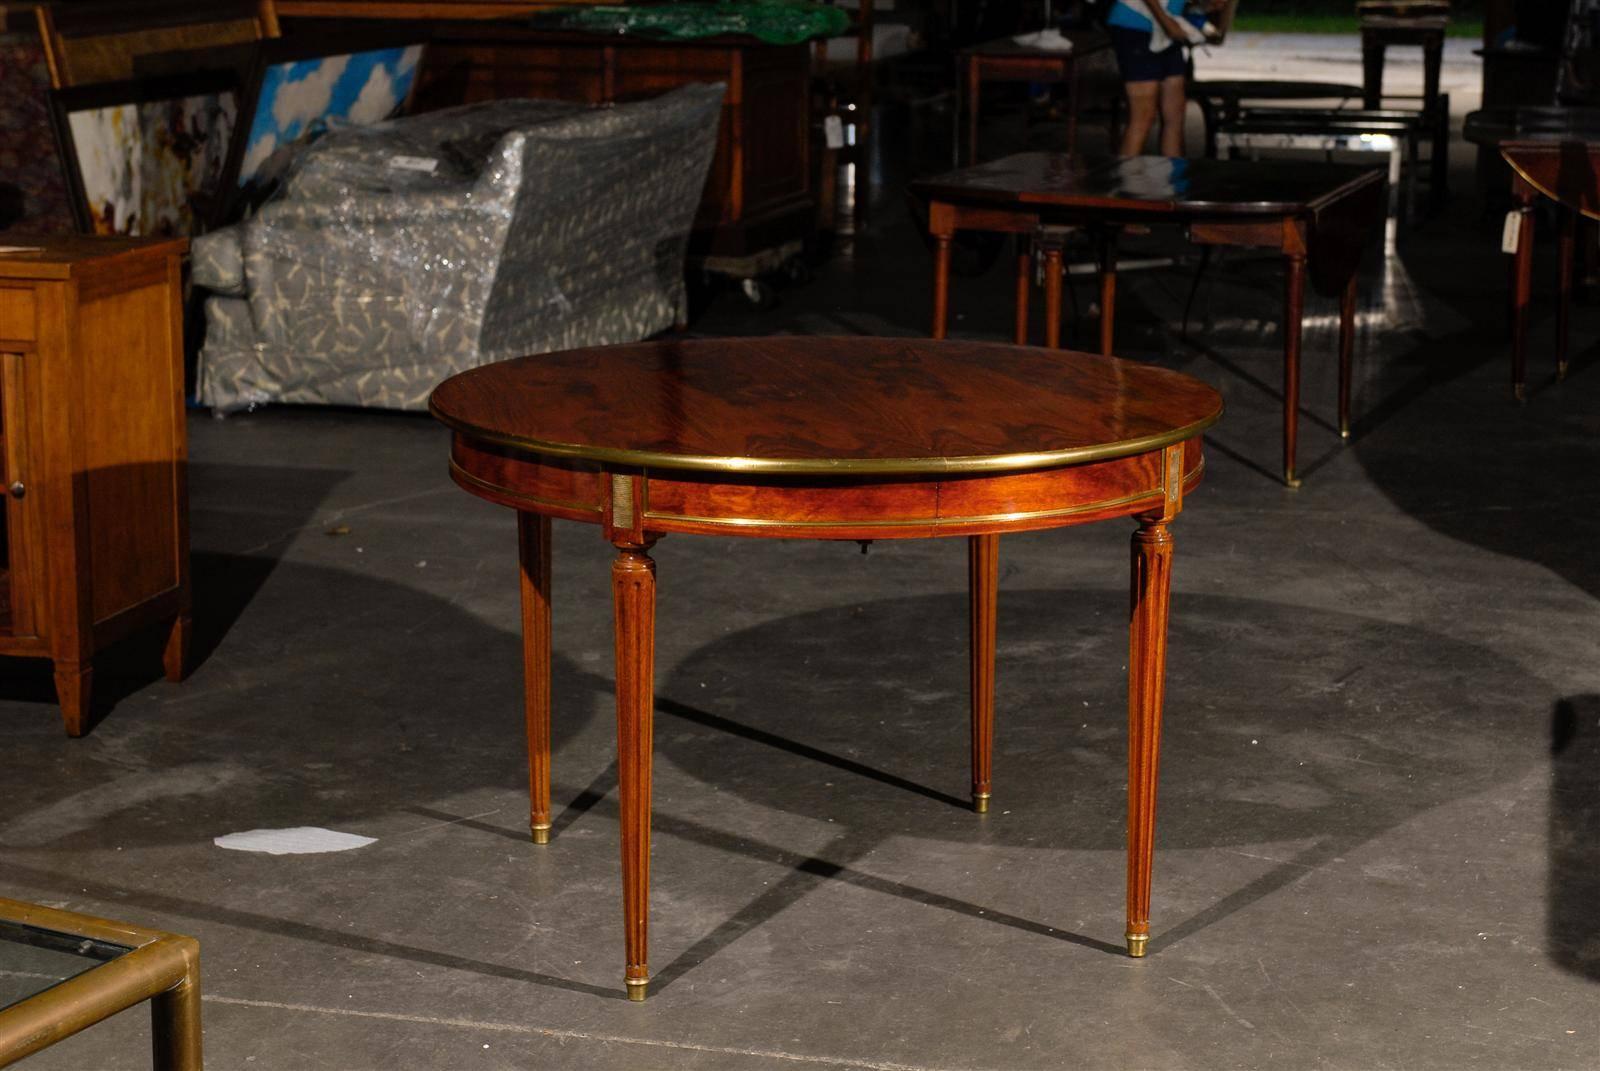 20th Century Louis XVI Style Round Dining Table with Bronze Edge Detail, Fluted Leg, Possibly Attributed to Maison Jansen
No leaves
Super quality
Perfect scale for smaller space dining room